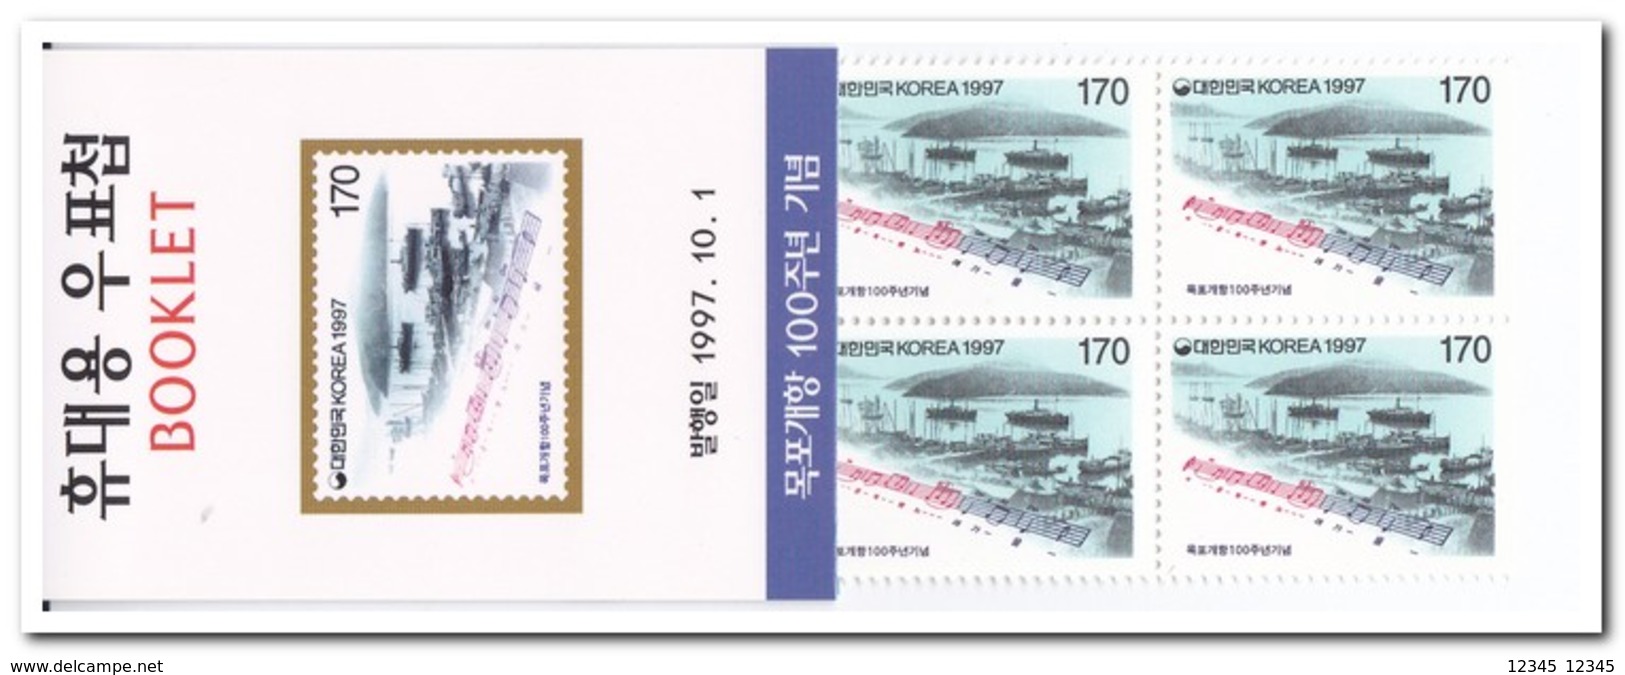 Zuid Korea 1997, Postfris MNH, 100 Anniversary Of The Opening Of The Port For Foreign Trade, Booklet - Corée Du Sud